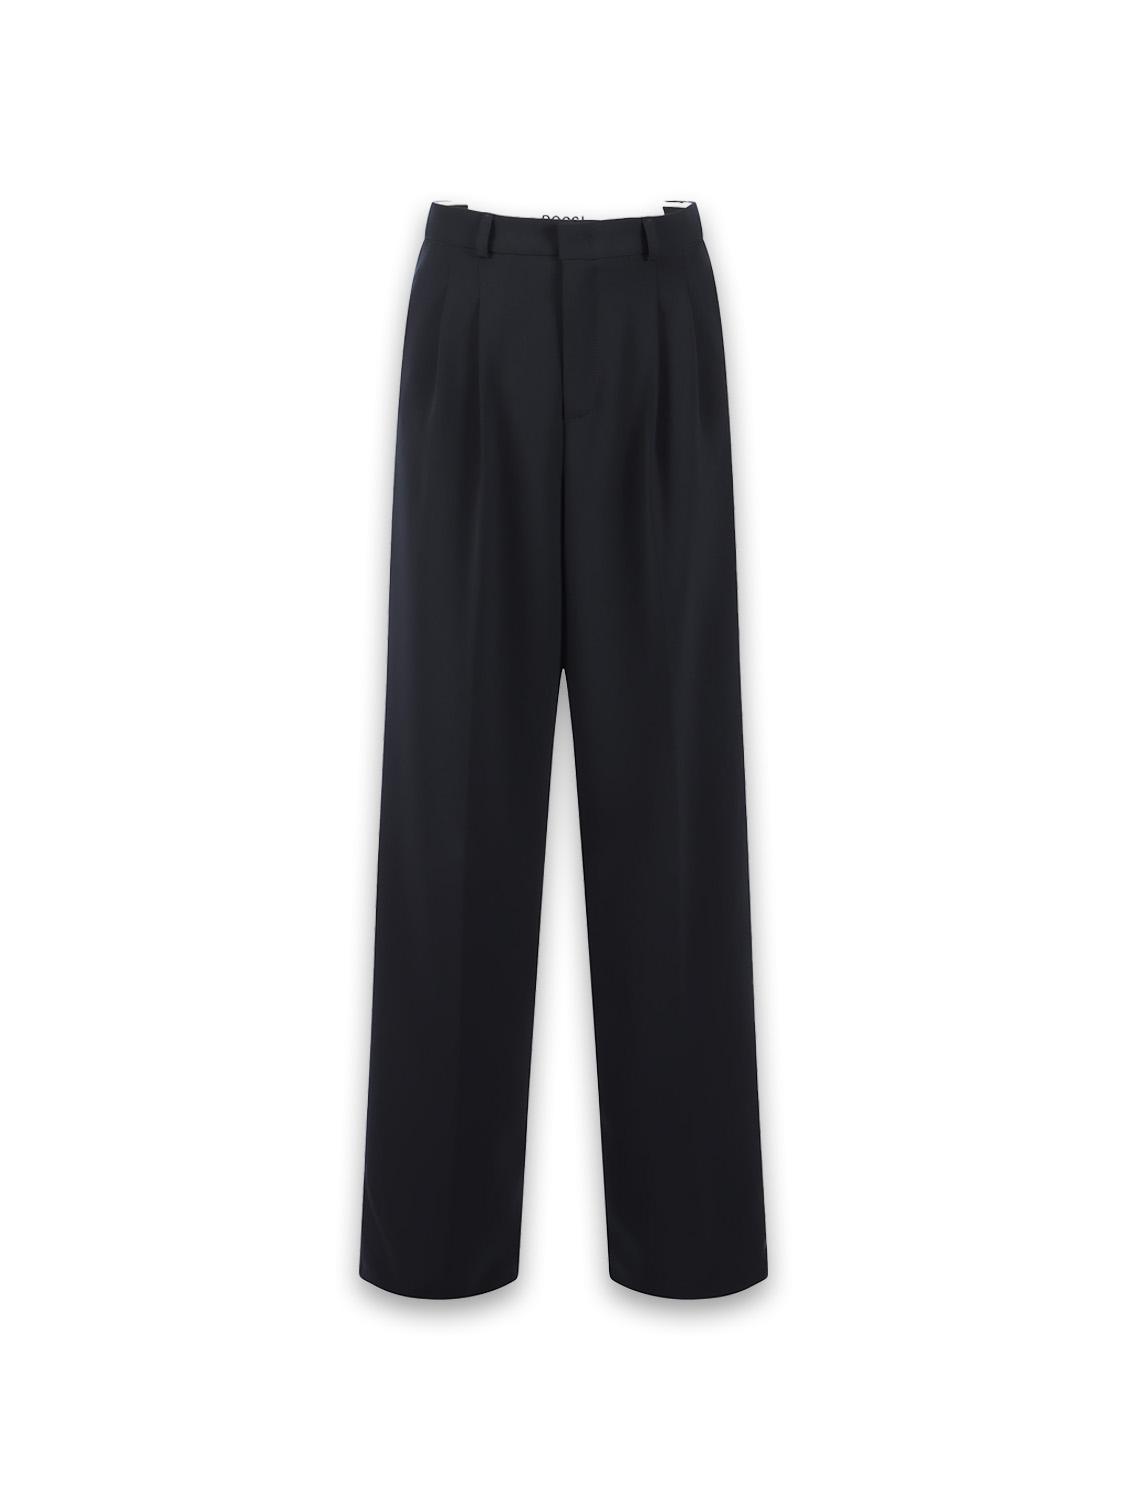 Rossi Noa - Stretchy pleated cotton trousers   marine XS